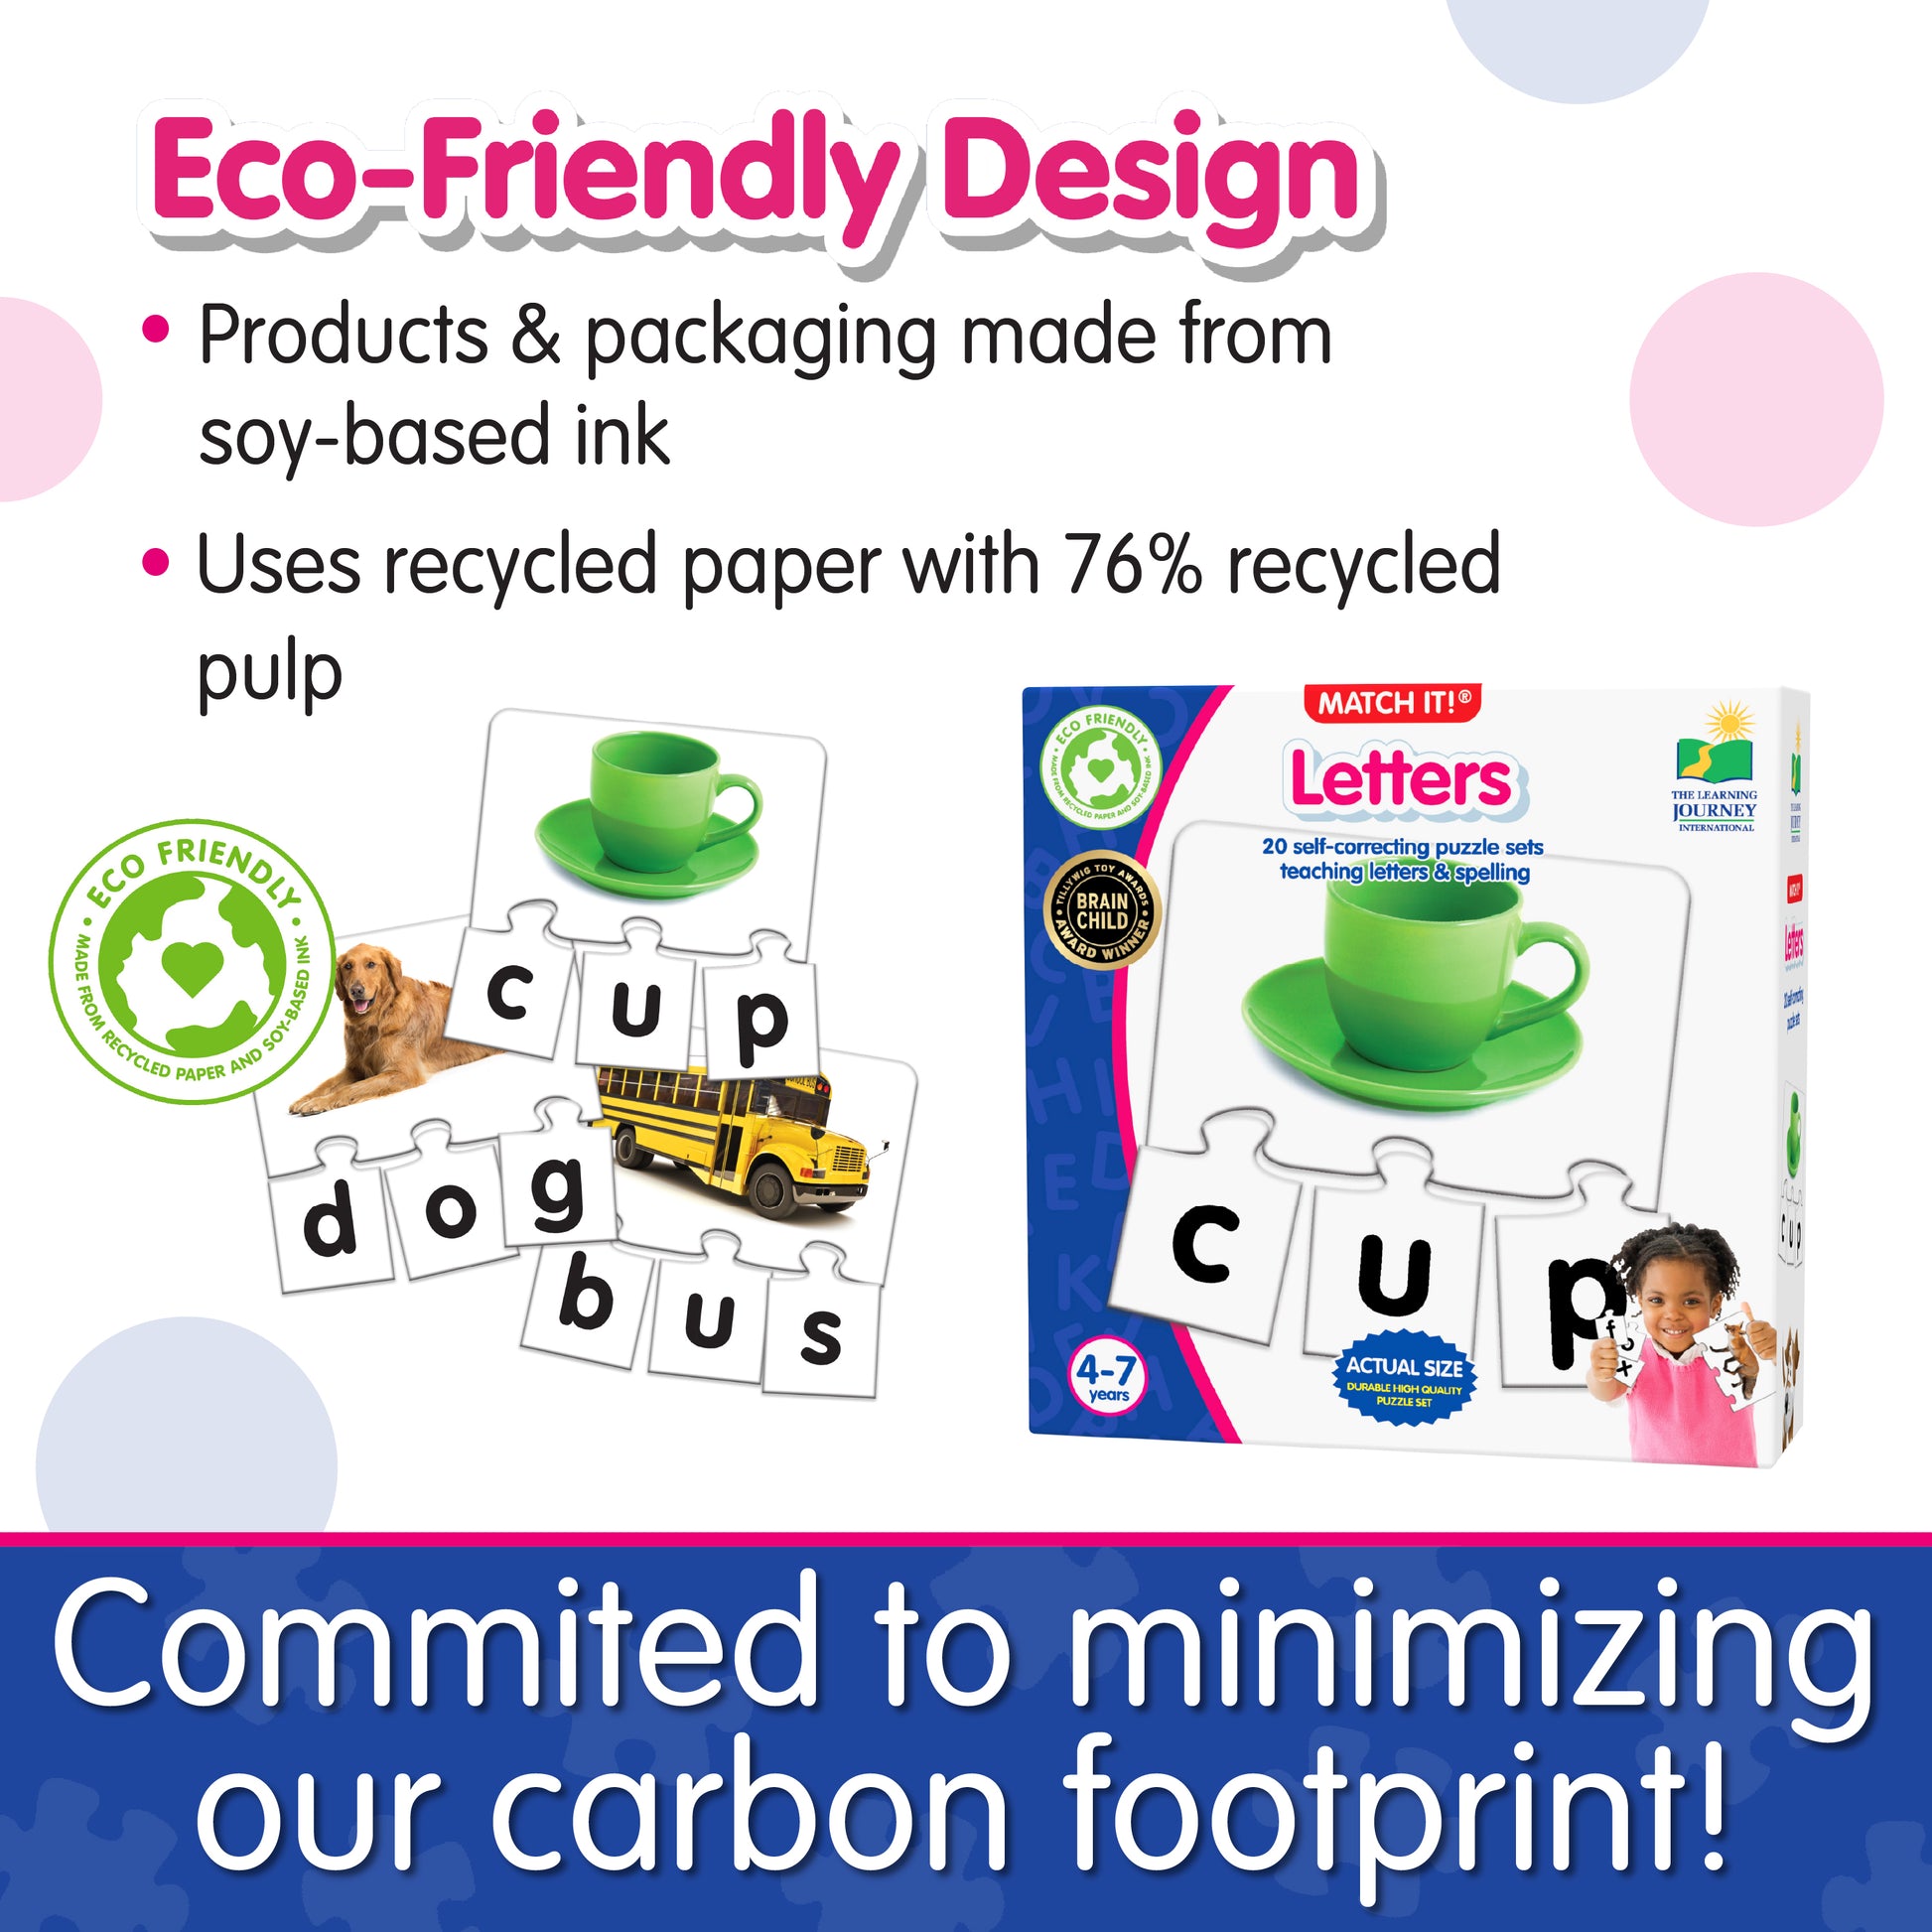 Infographic about Match It - Letters' eco-friendly design that says, "Committed to minimizing our carbon footprint!"